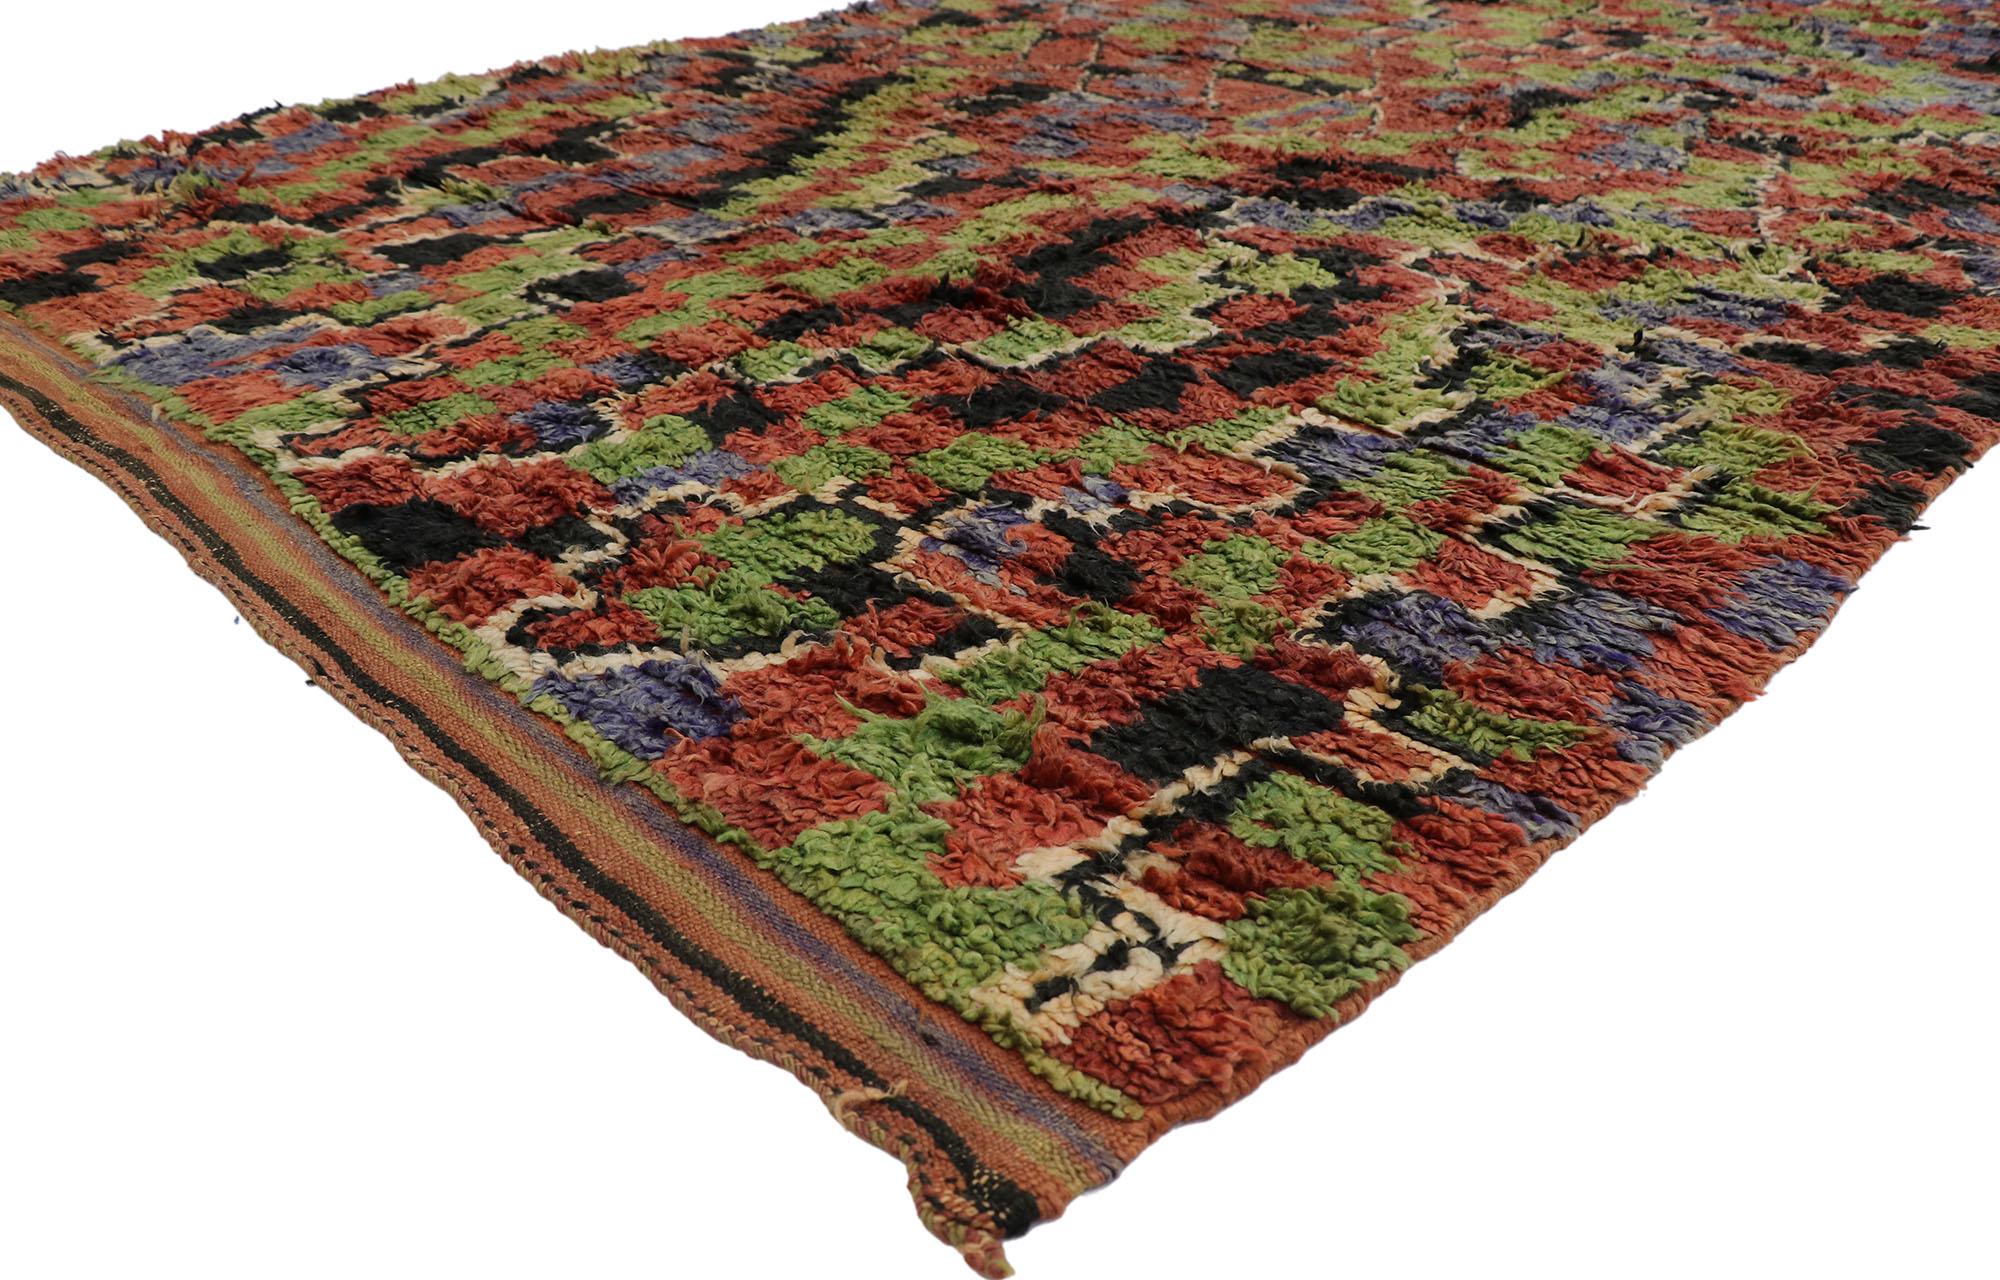 21295 Vintage Ait Bou Ichaouen Moroccan Rug, 06'11 x 11'03.
Emanating nomadic charm with incredible detail and texture, this hand knotted wool Ait Bou Ichaouen Moroccan rug is a captivating vision of woven beauty. The visual complexity and lively